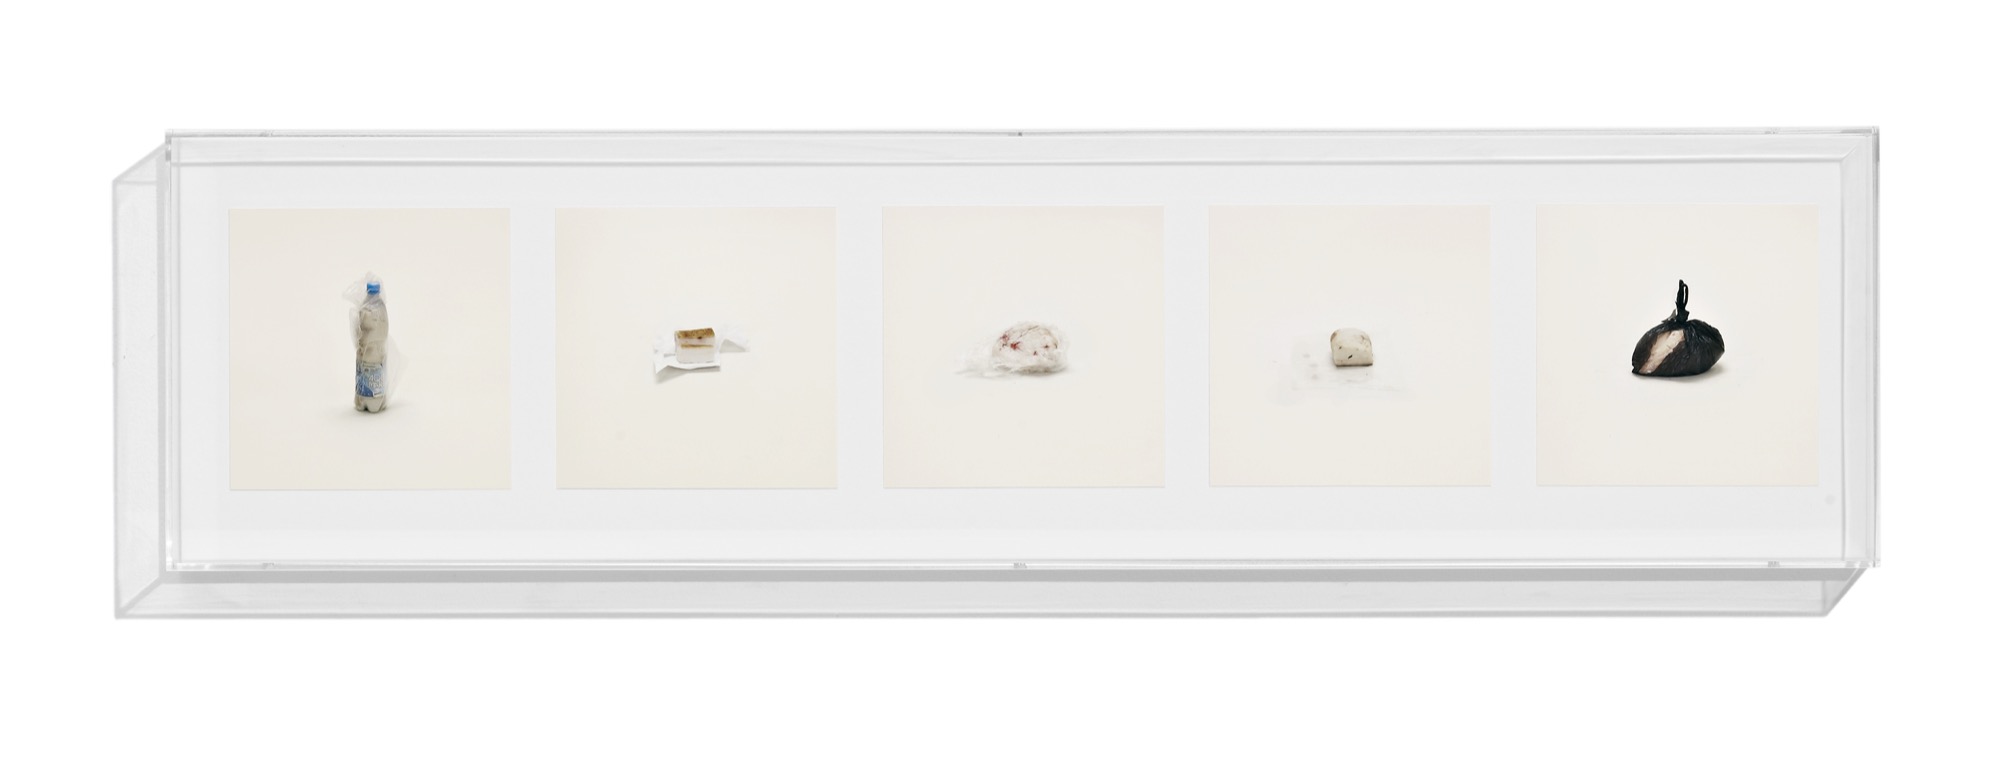 Fat (Prohibited) <em>Contraband</em>, 2010, 5 archival inkjet prints in 1 Plexiglas box and Letraset on wall 9 1⁄4 x 37 1⁄4 inches (23.5 x 94.6 cm) © Taryn Simon. Courtesy Gagosian and Anna Schwartz Gallery.